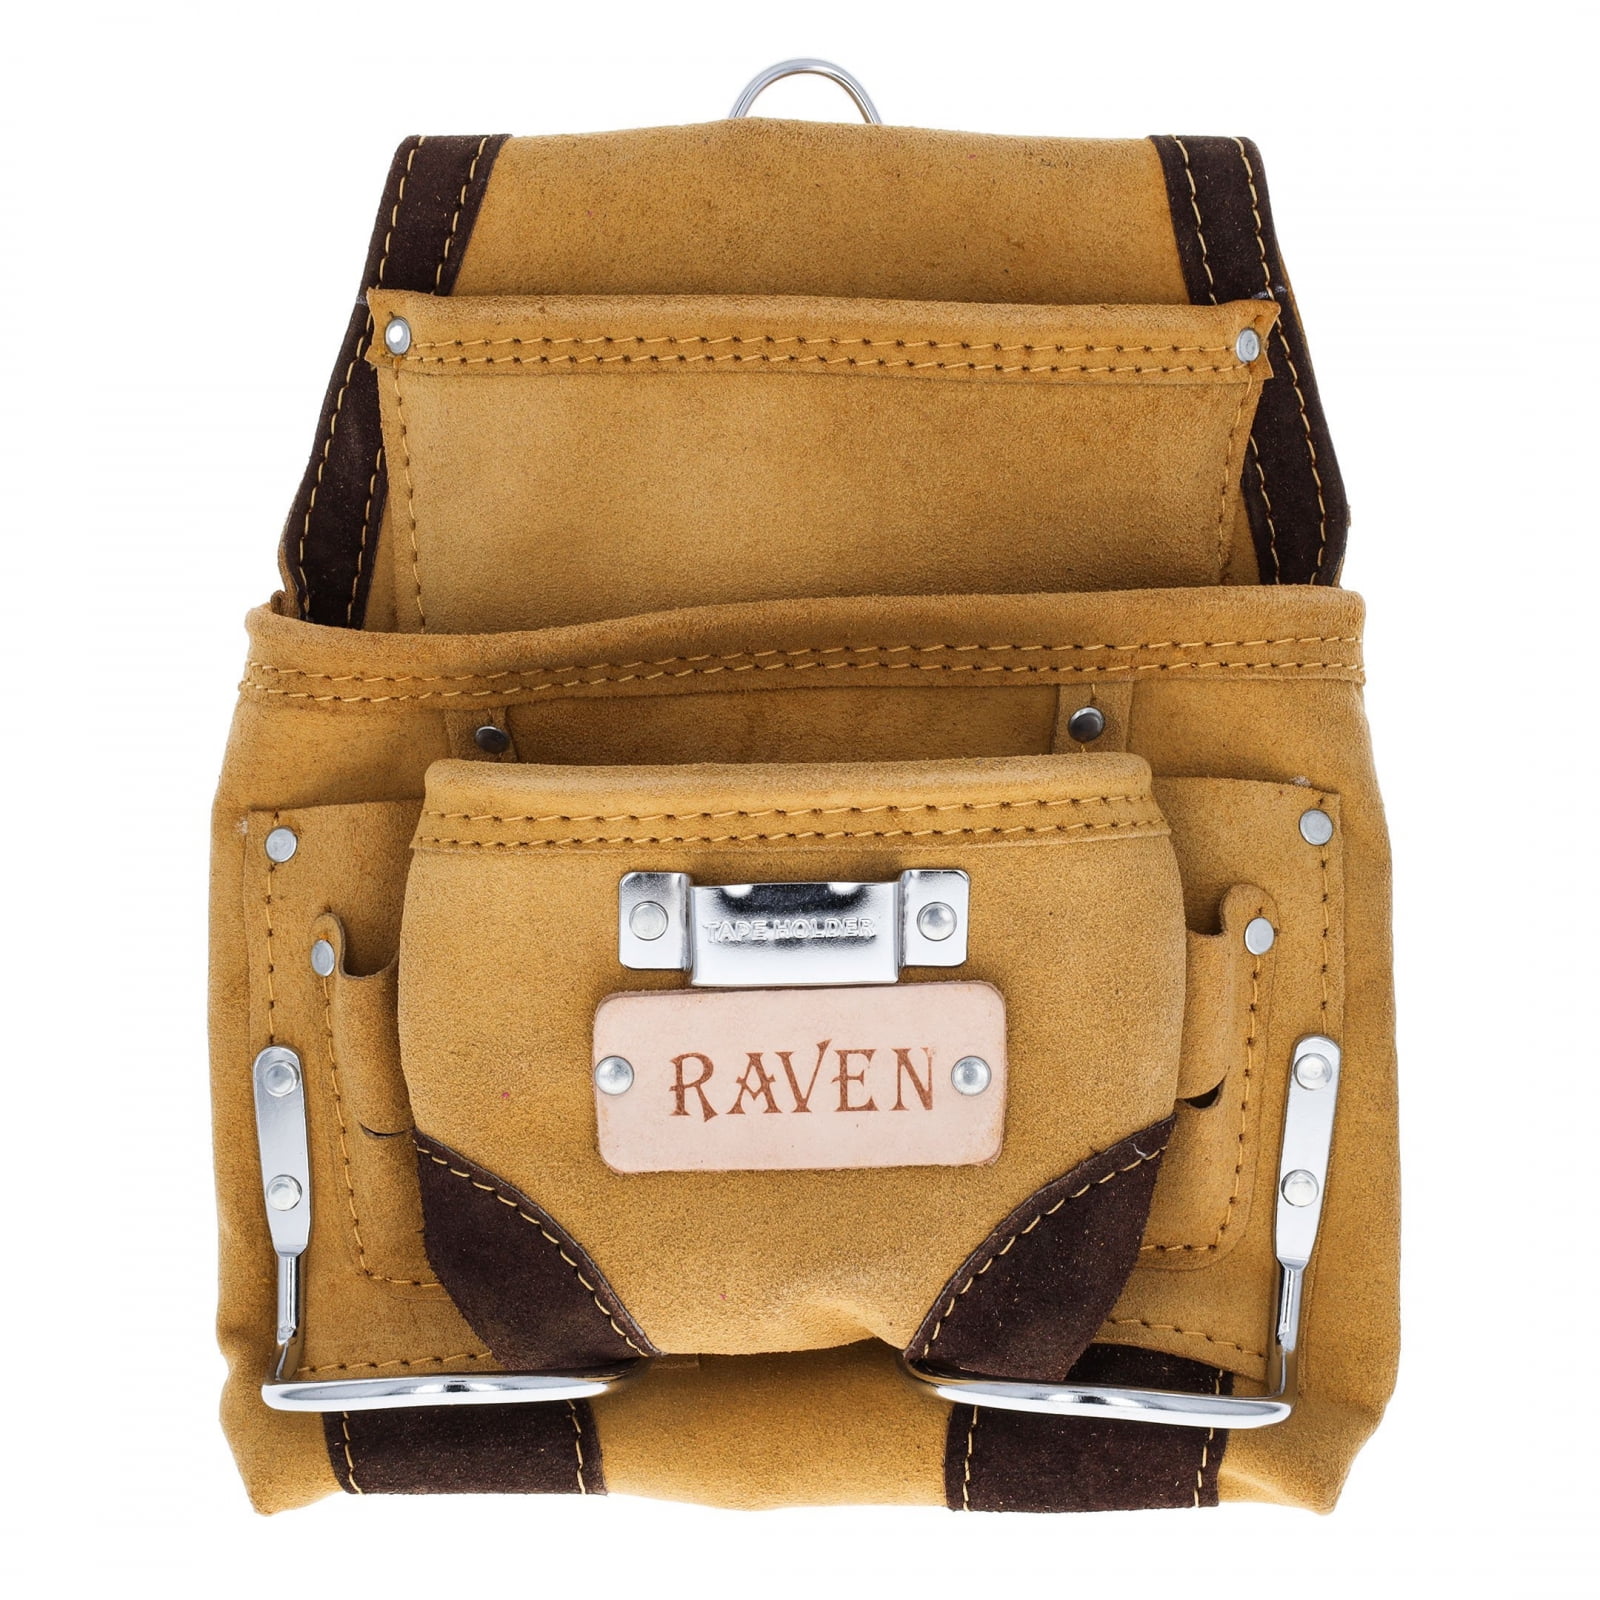 OIL-TAN-LEATHER-10-pkt-Carpenter-Nail-and-Tool-Pouch-waist-Belt-Bag Dark Brown 